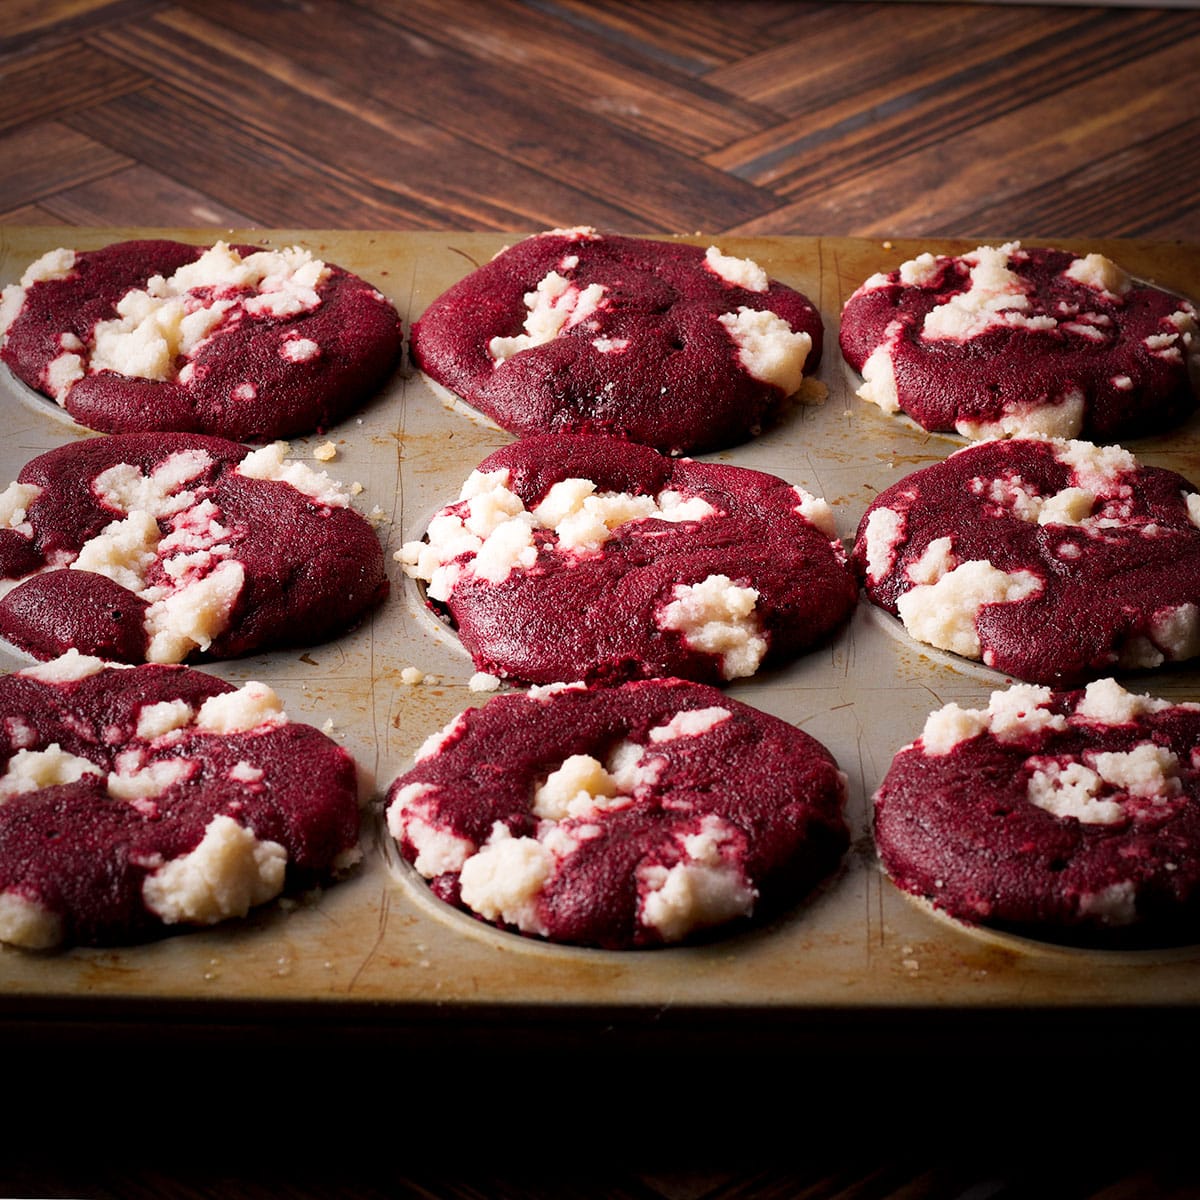 A freshly baked pan of red velvet muffins with a crumb topping.